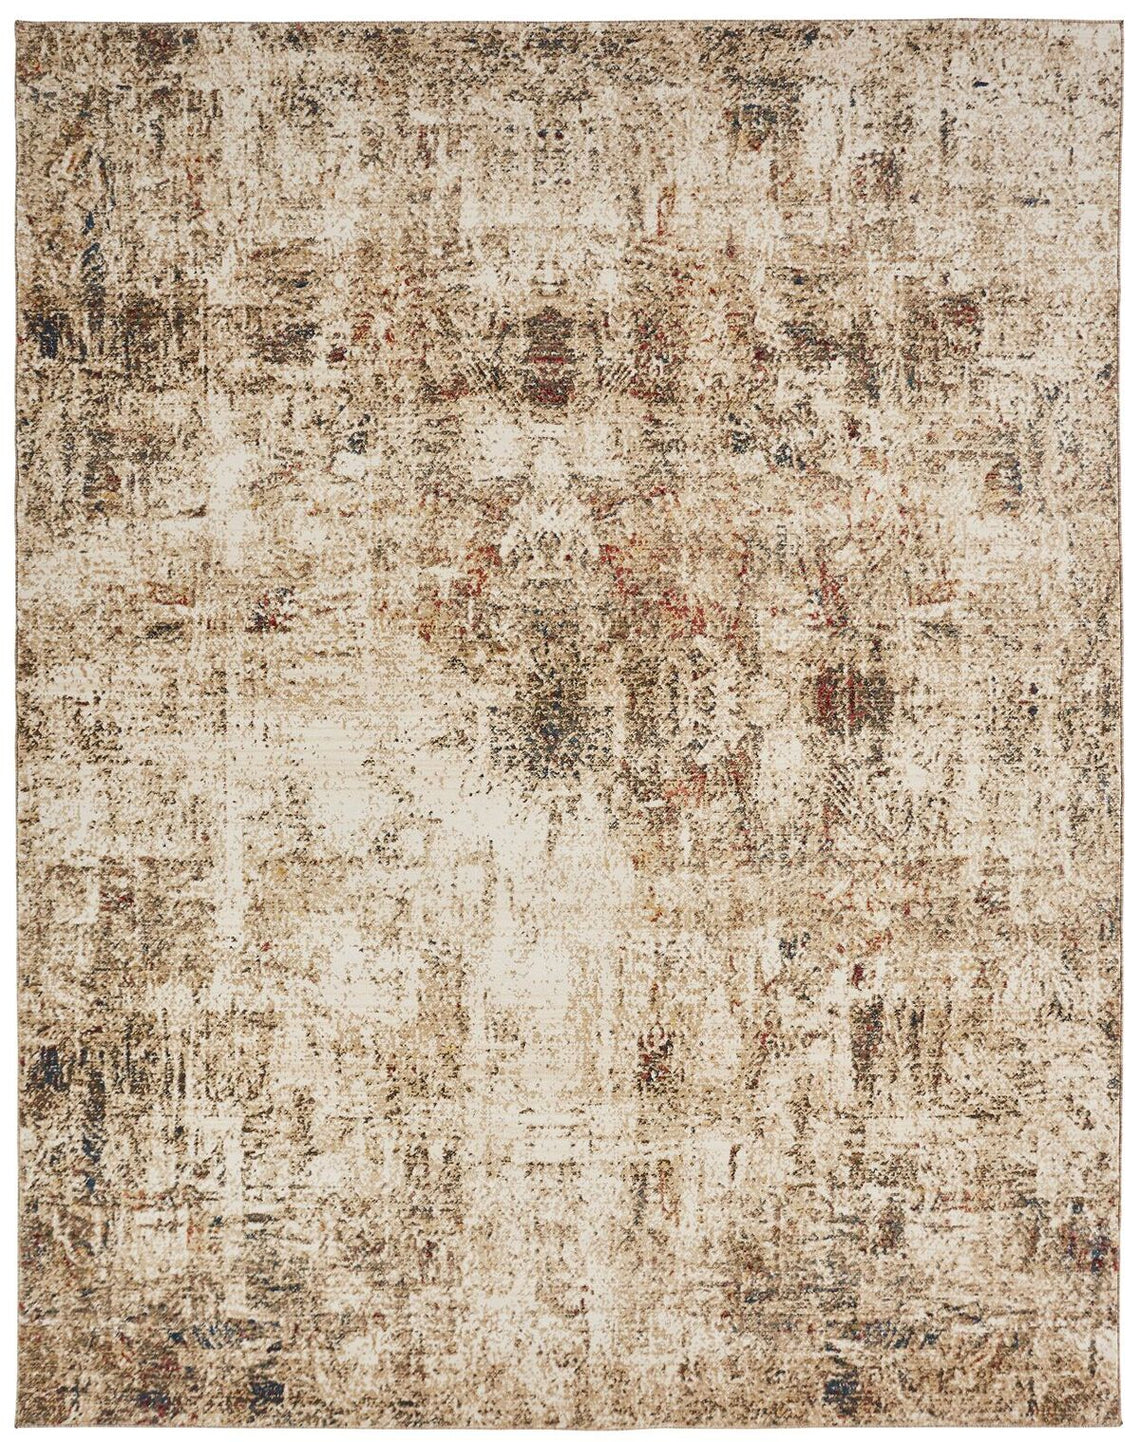 Theory Sand Tones 5 ft. 5 in. X 7 ft. 7 in. Area Rug